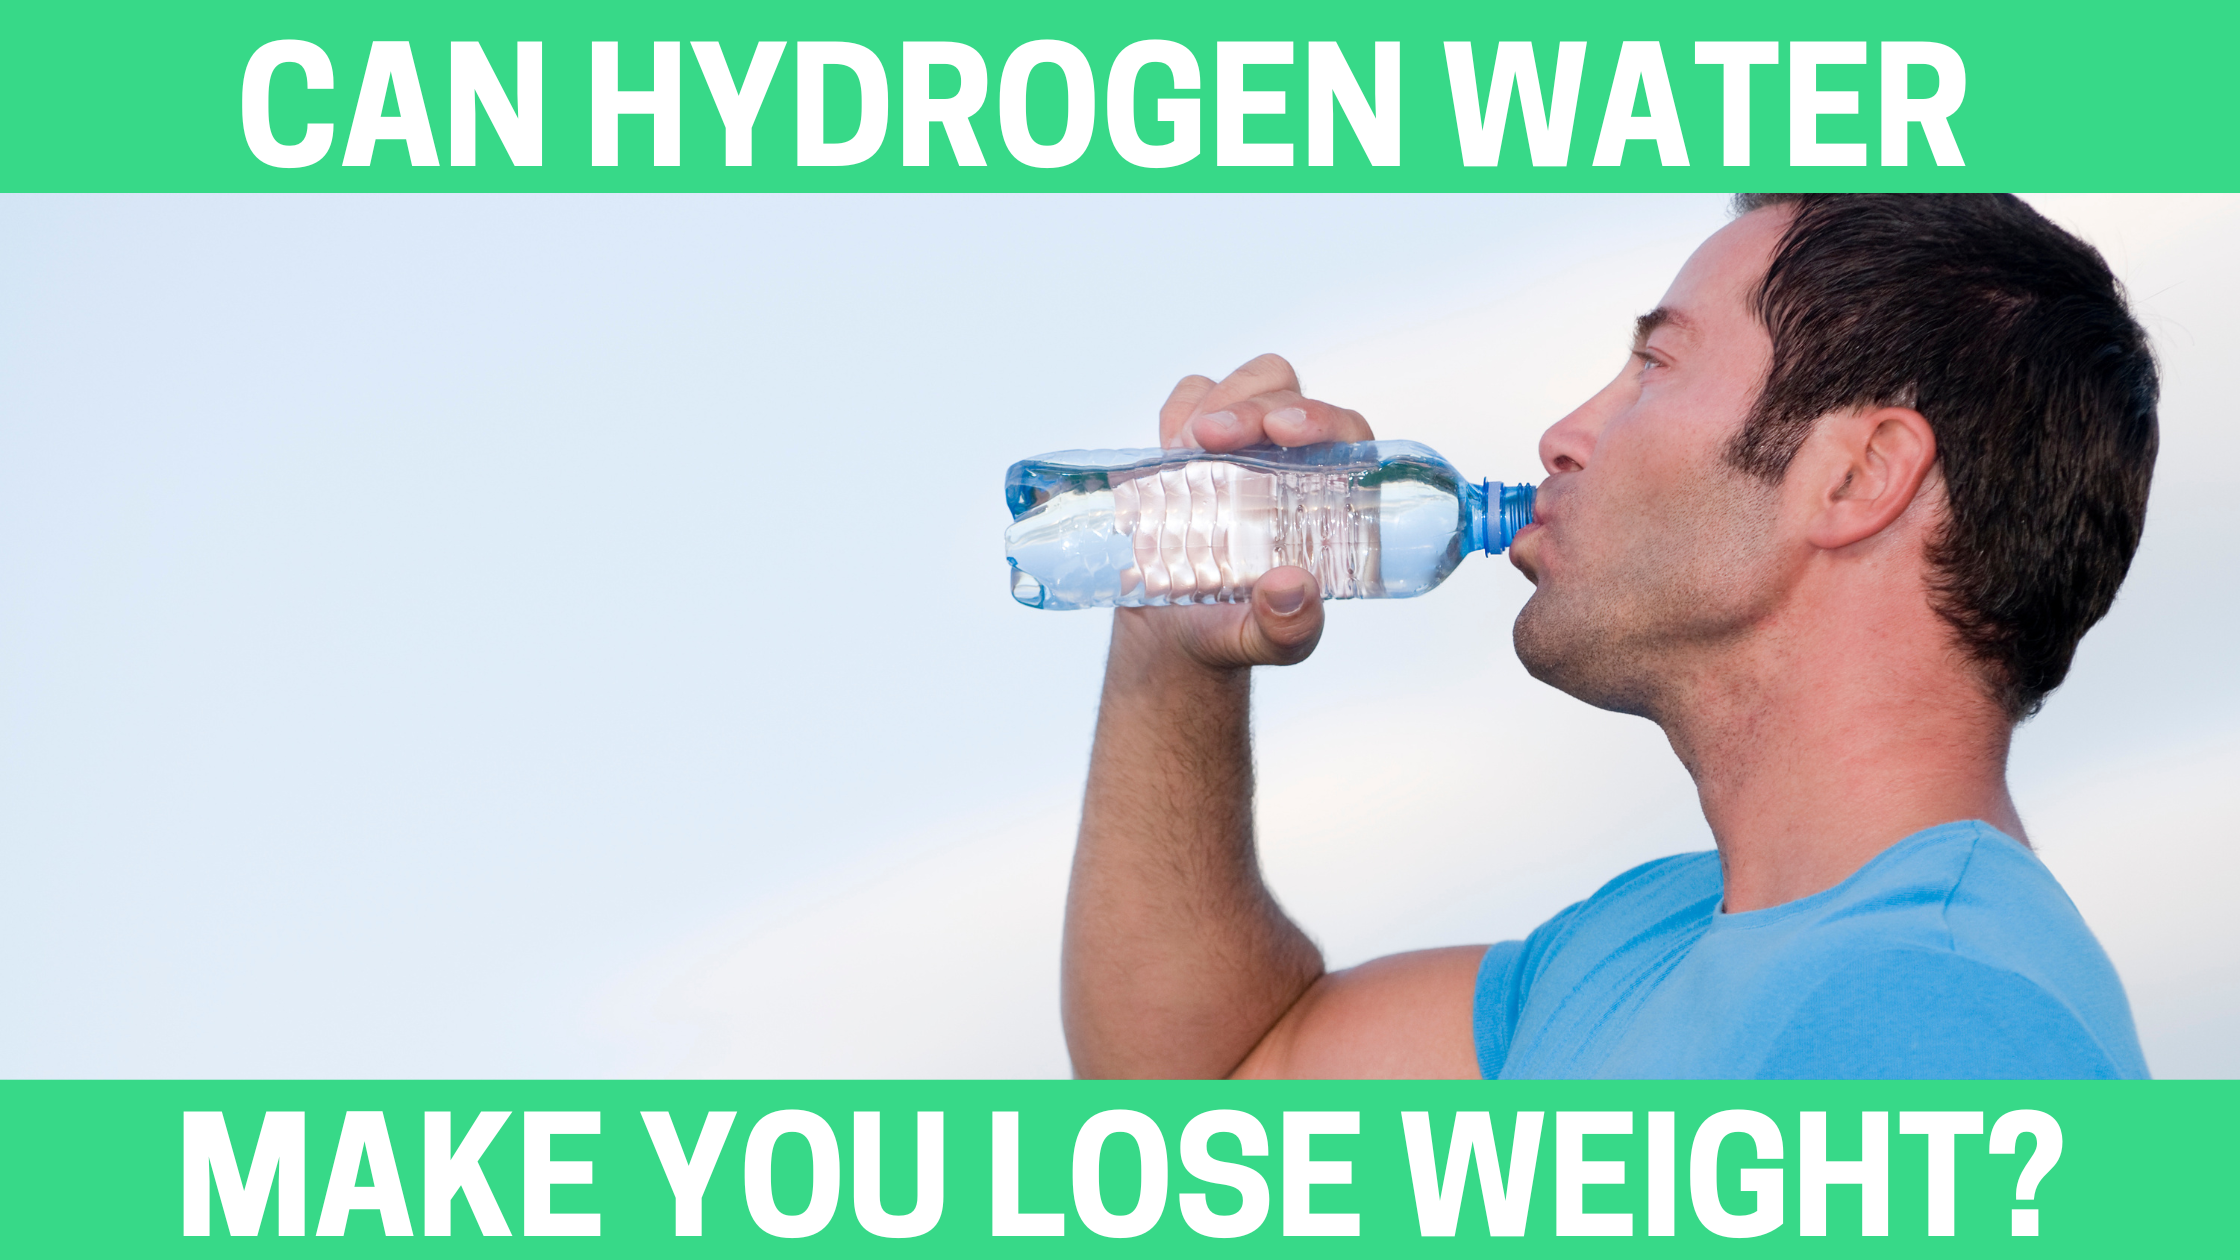 Can Hydrogen Water Make you Lose Weight?